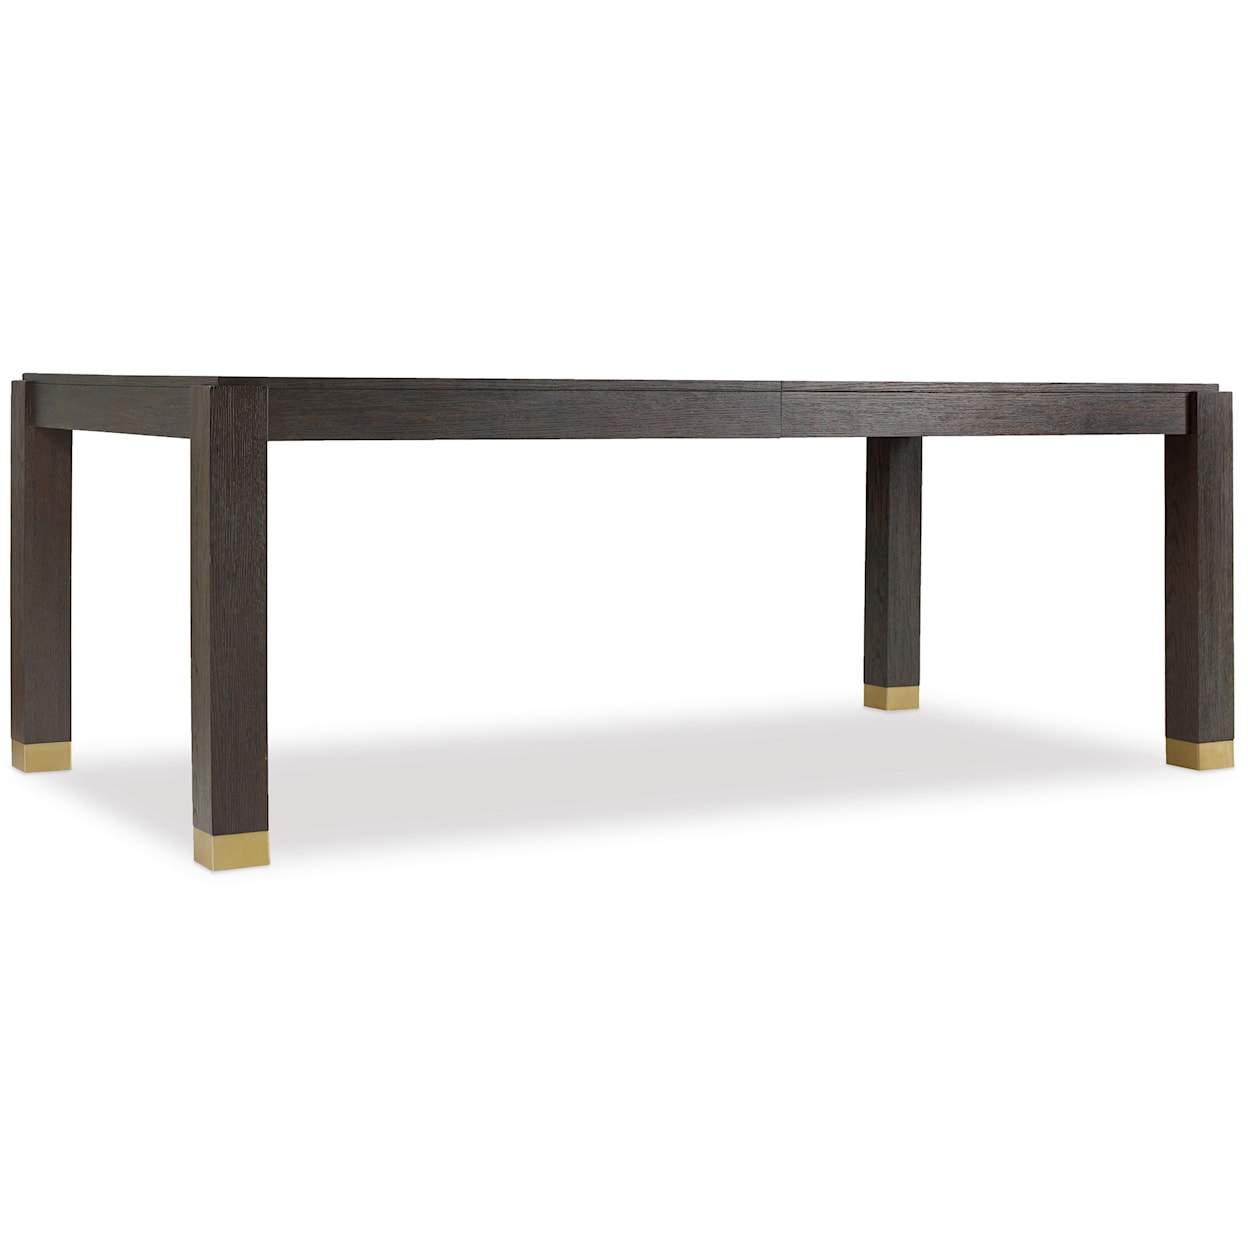 Hooker Furniture Curata Dining Table